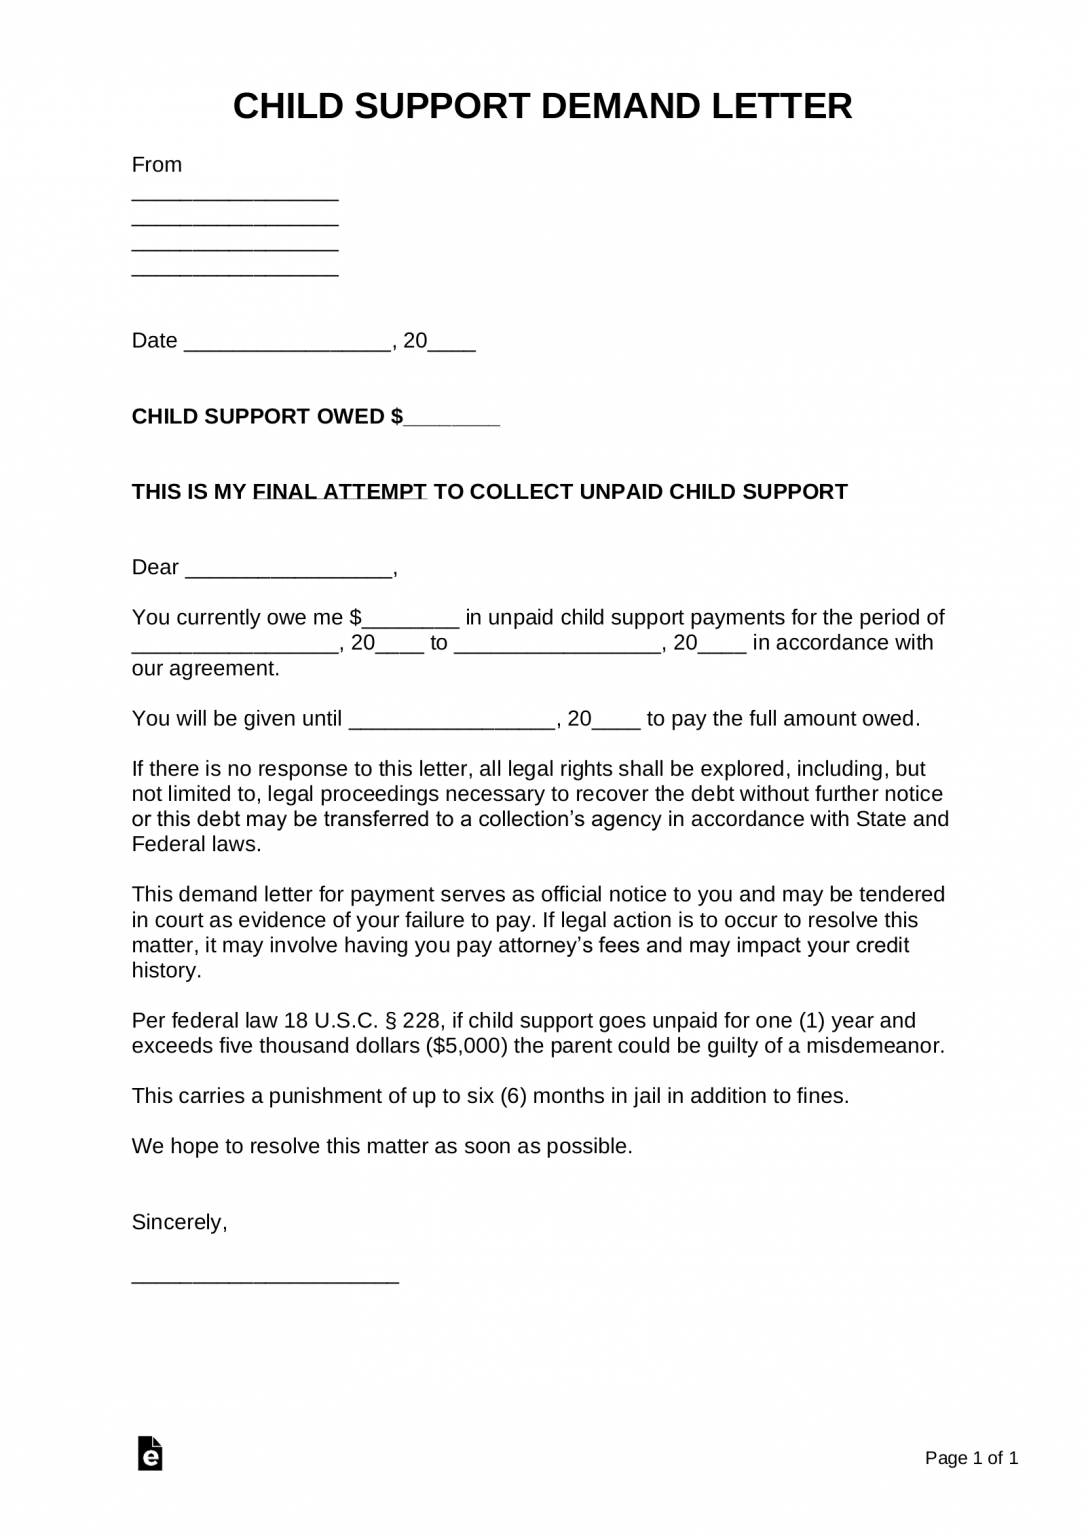 free-child-support-demand-letter-template-sample-pdf-word-eforms